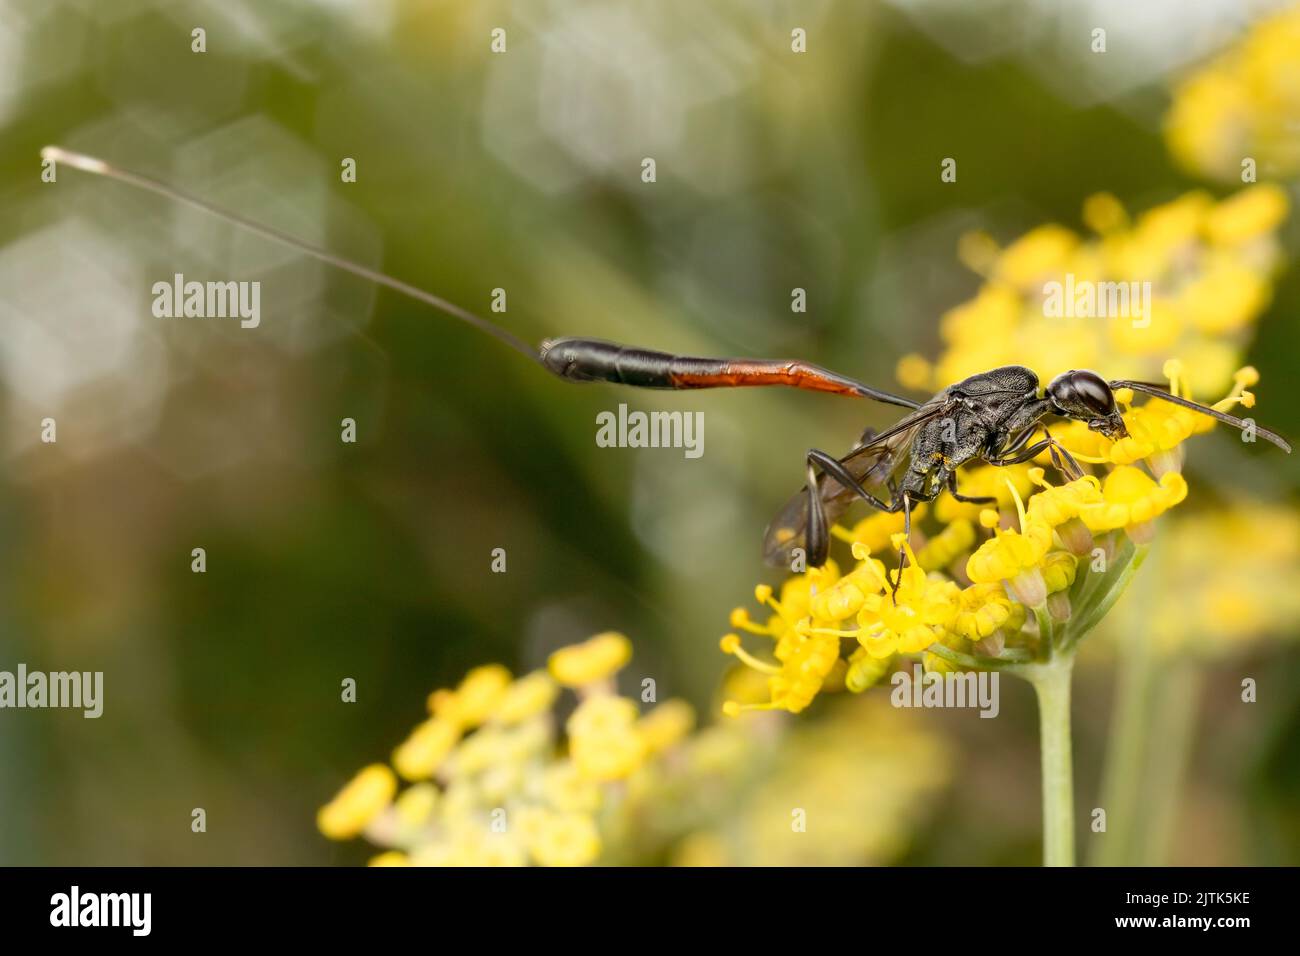 A female parasitic wasp (Gasteruption jaculator) with a massive ovipositor (egg laying spike on the end of her abdomen) feeding on nectar. Stock Photo